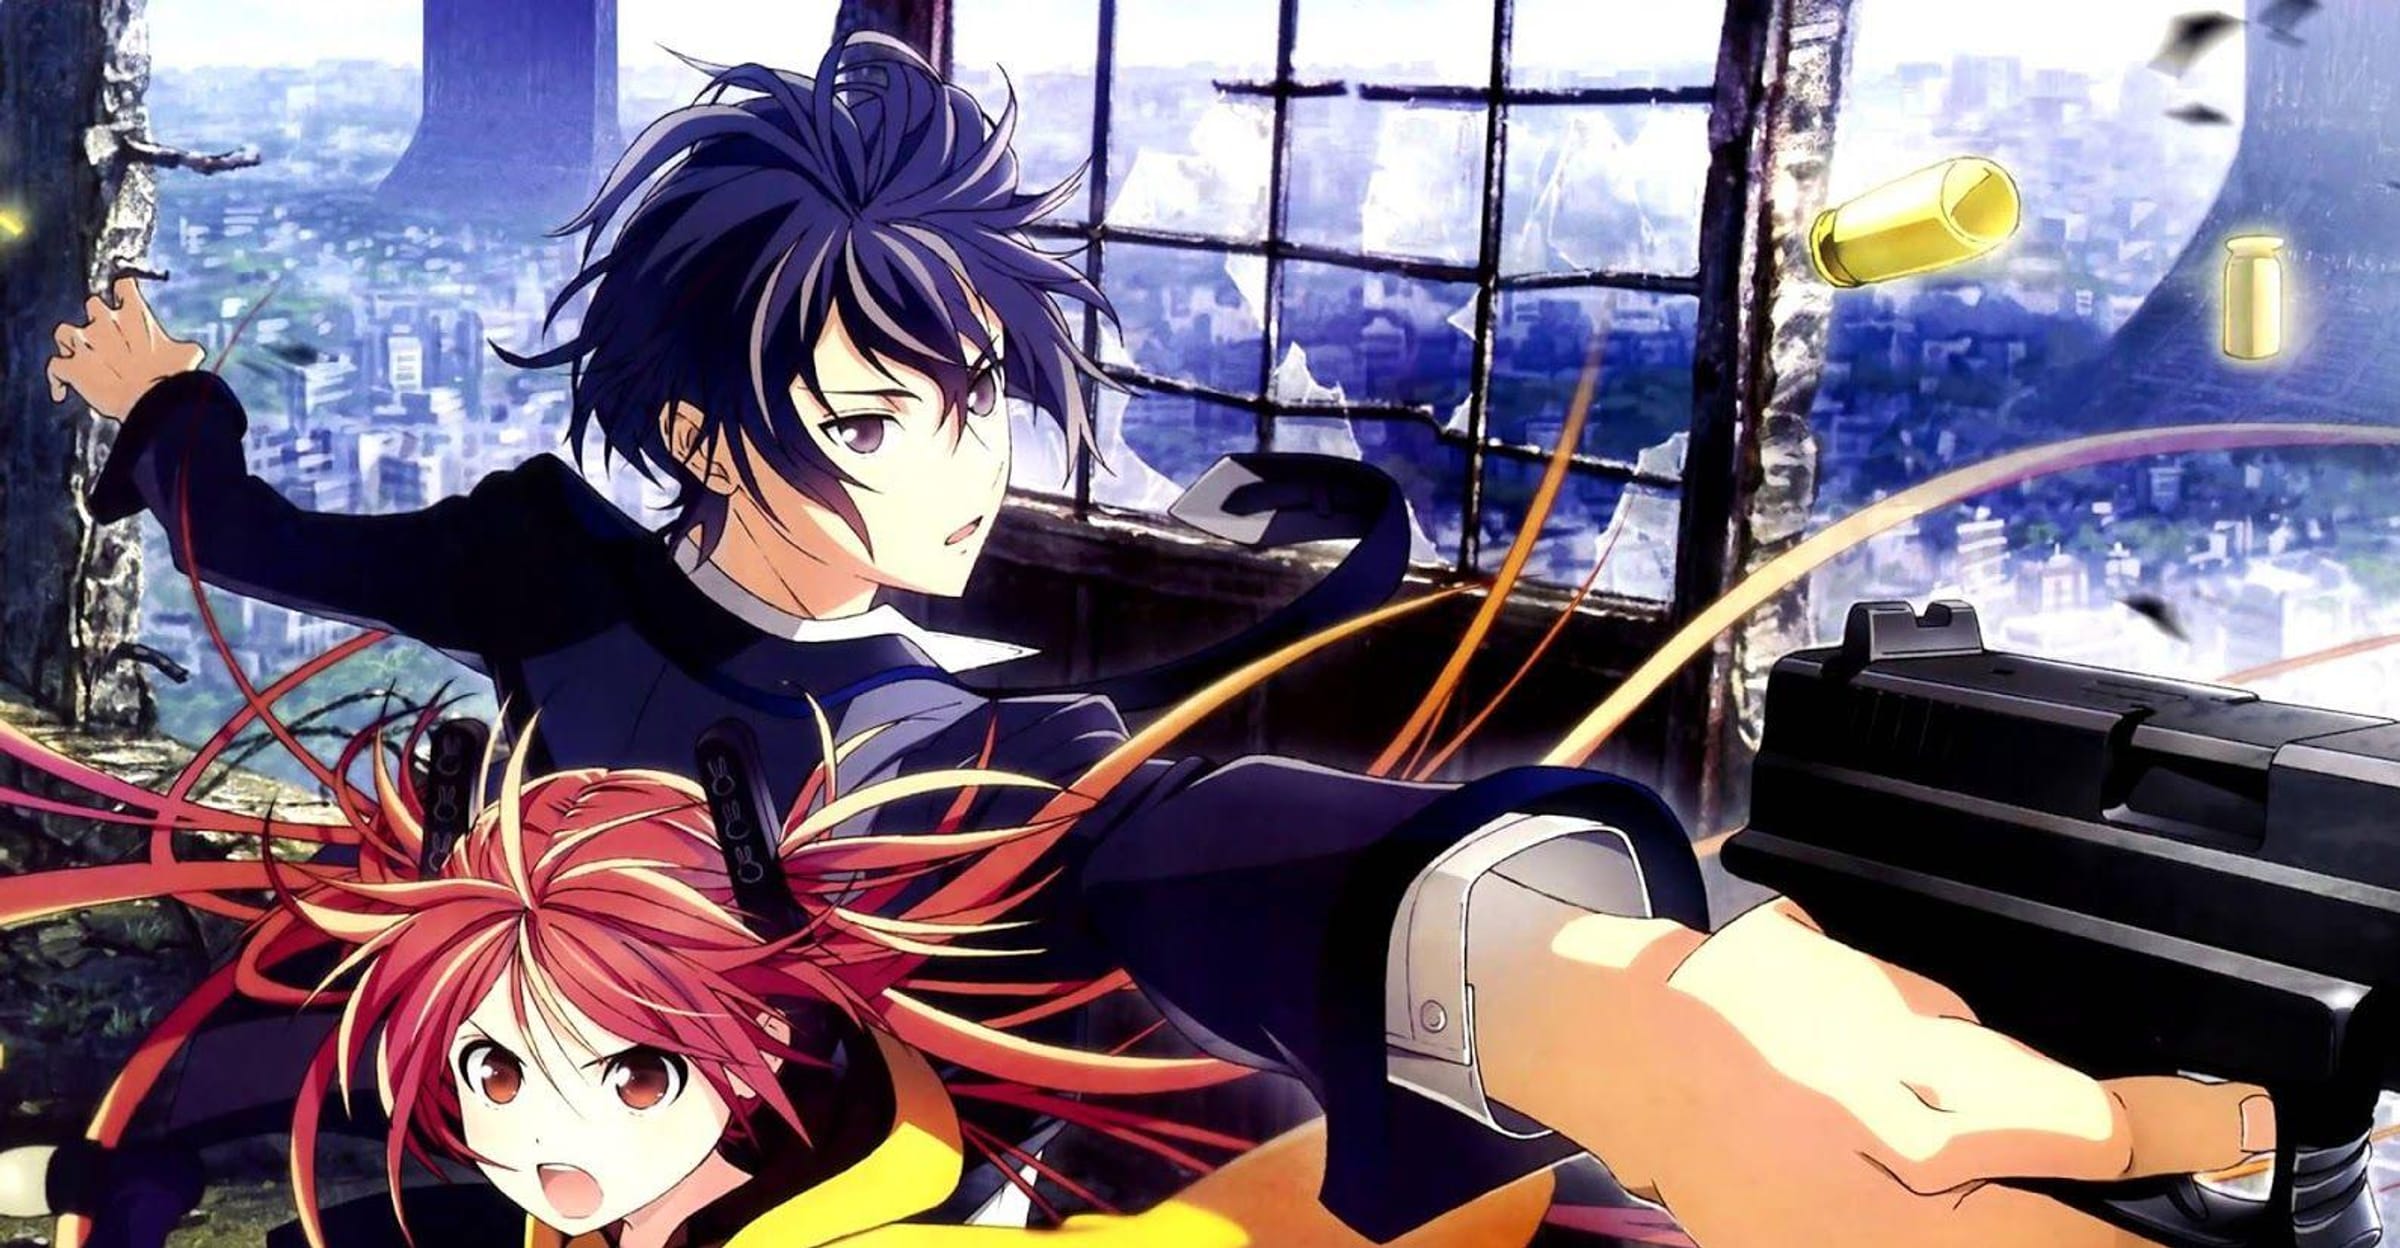 Is Black Bullet (anime) underrated, or do I just think highly of it? - Quora